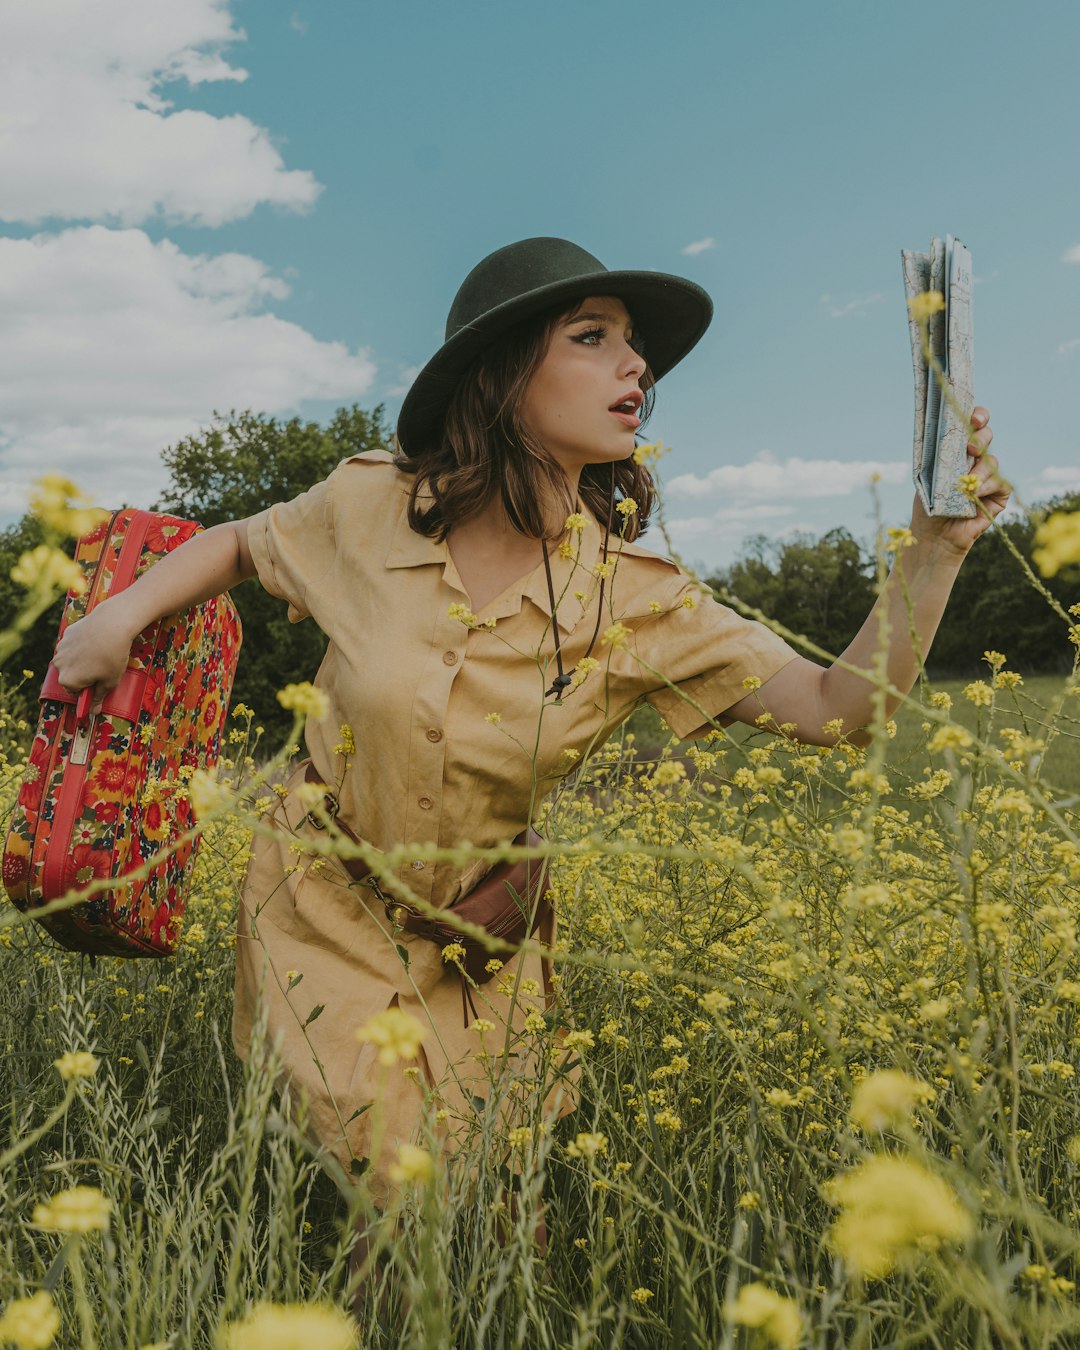 woman in brown dress and black hat standing on yellow flower field during daytime